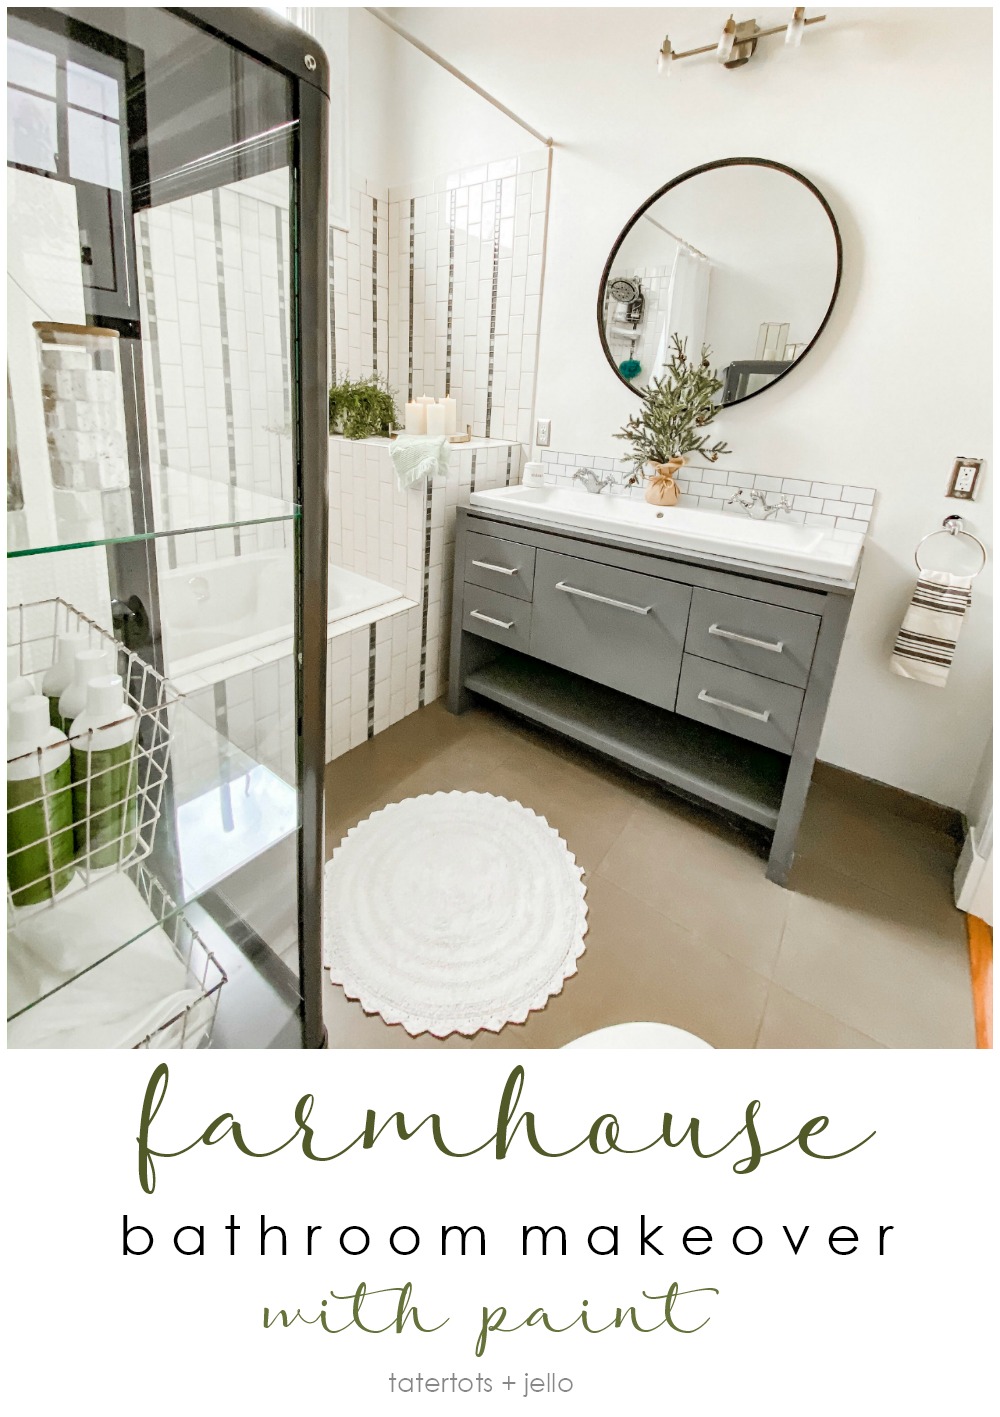 Modern Farmhouse Bathroom Update with Paint. Update a tired bathroom inexpensively and easily with paint, all it takes is a few hours plus Kilz primer and paint.﻿